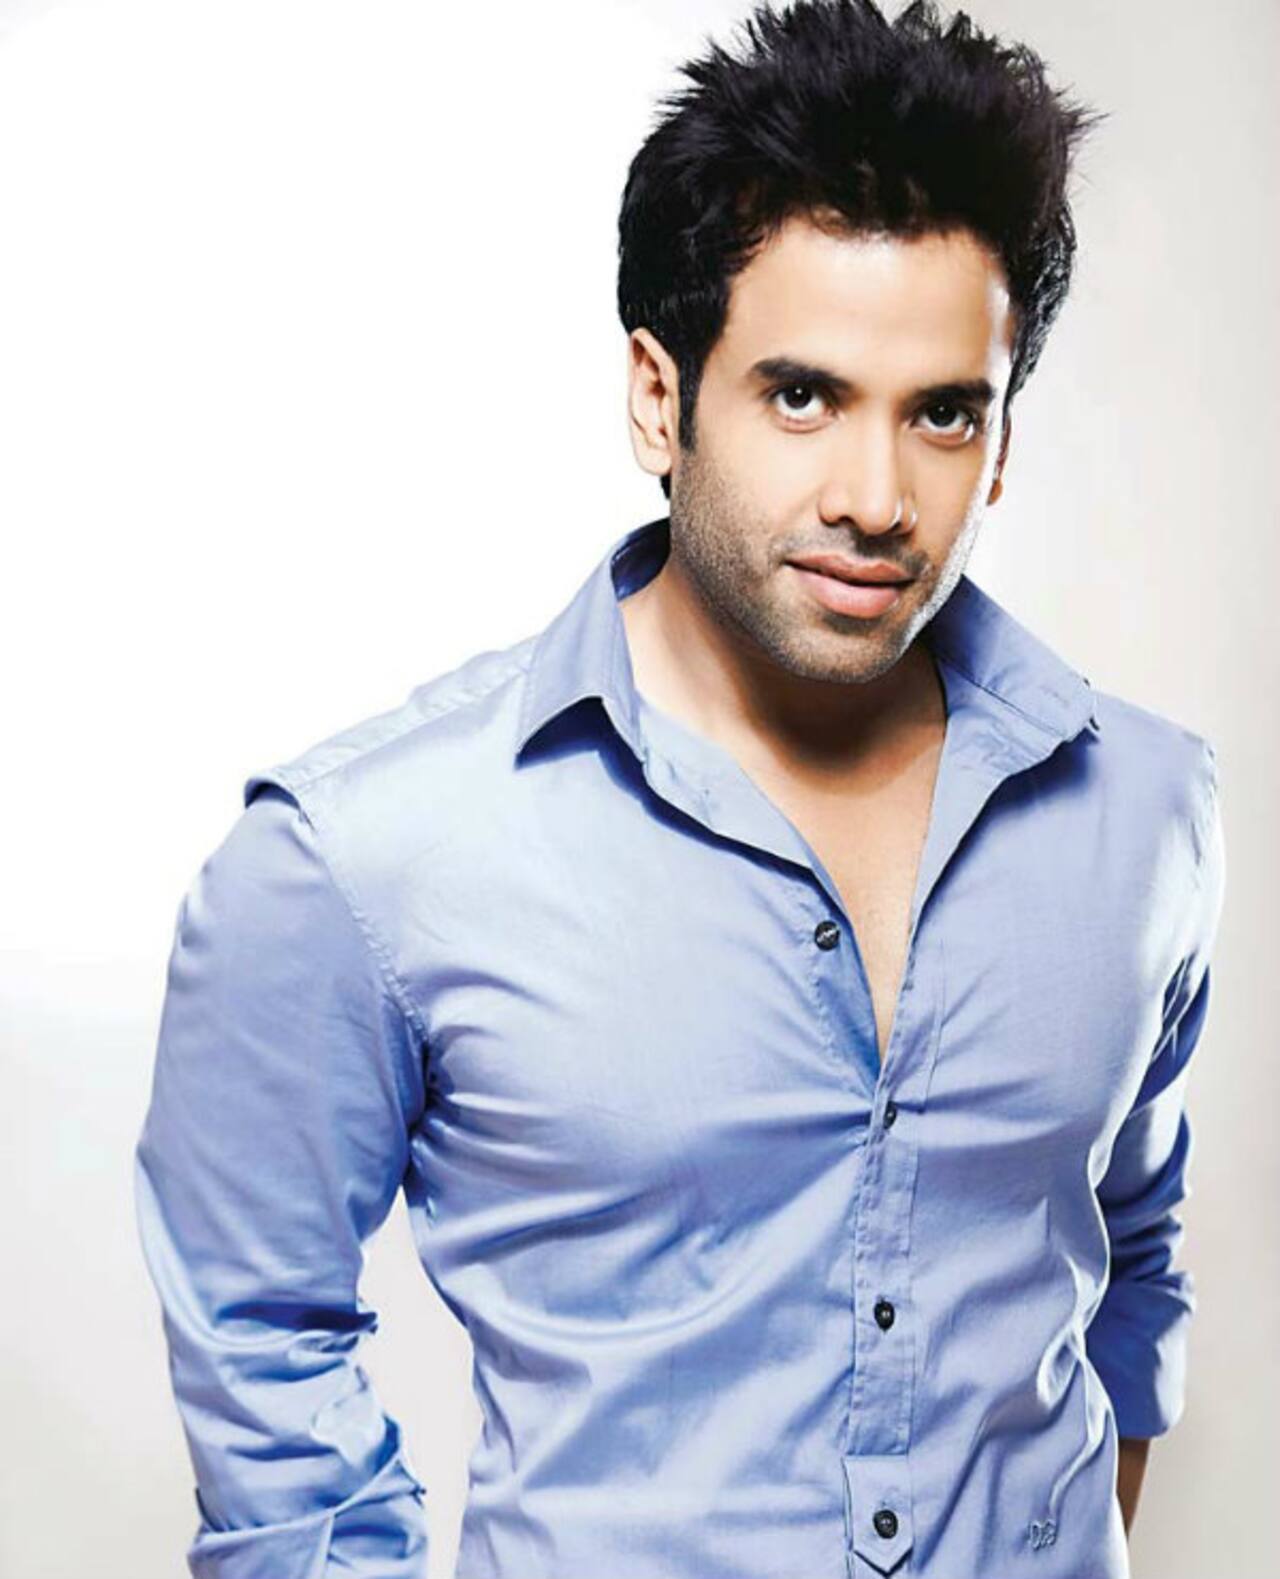 I have no qualms being a part of adult comedies, says Tusshar Kapoor